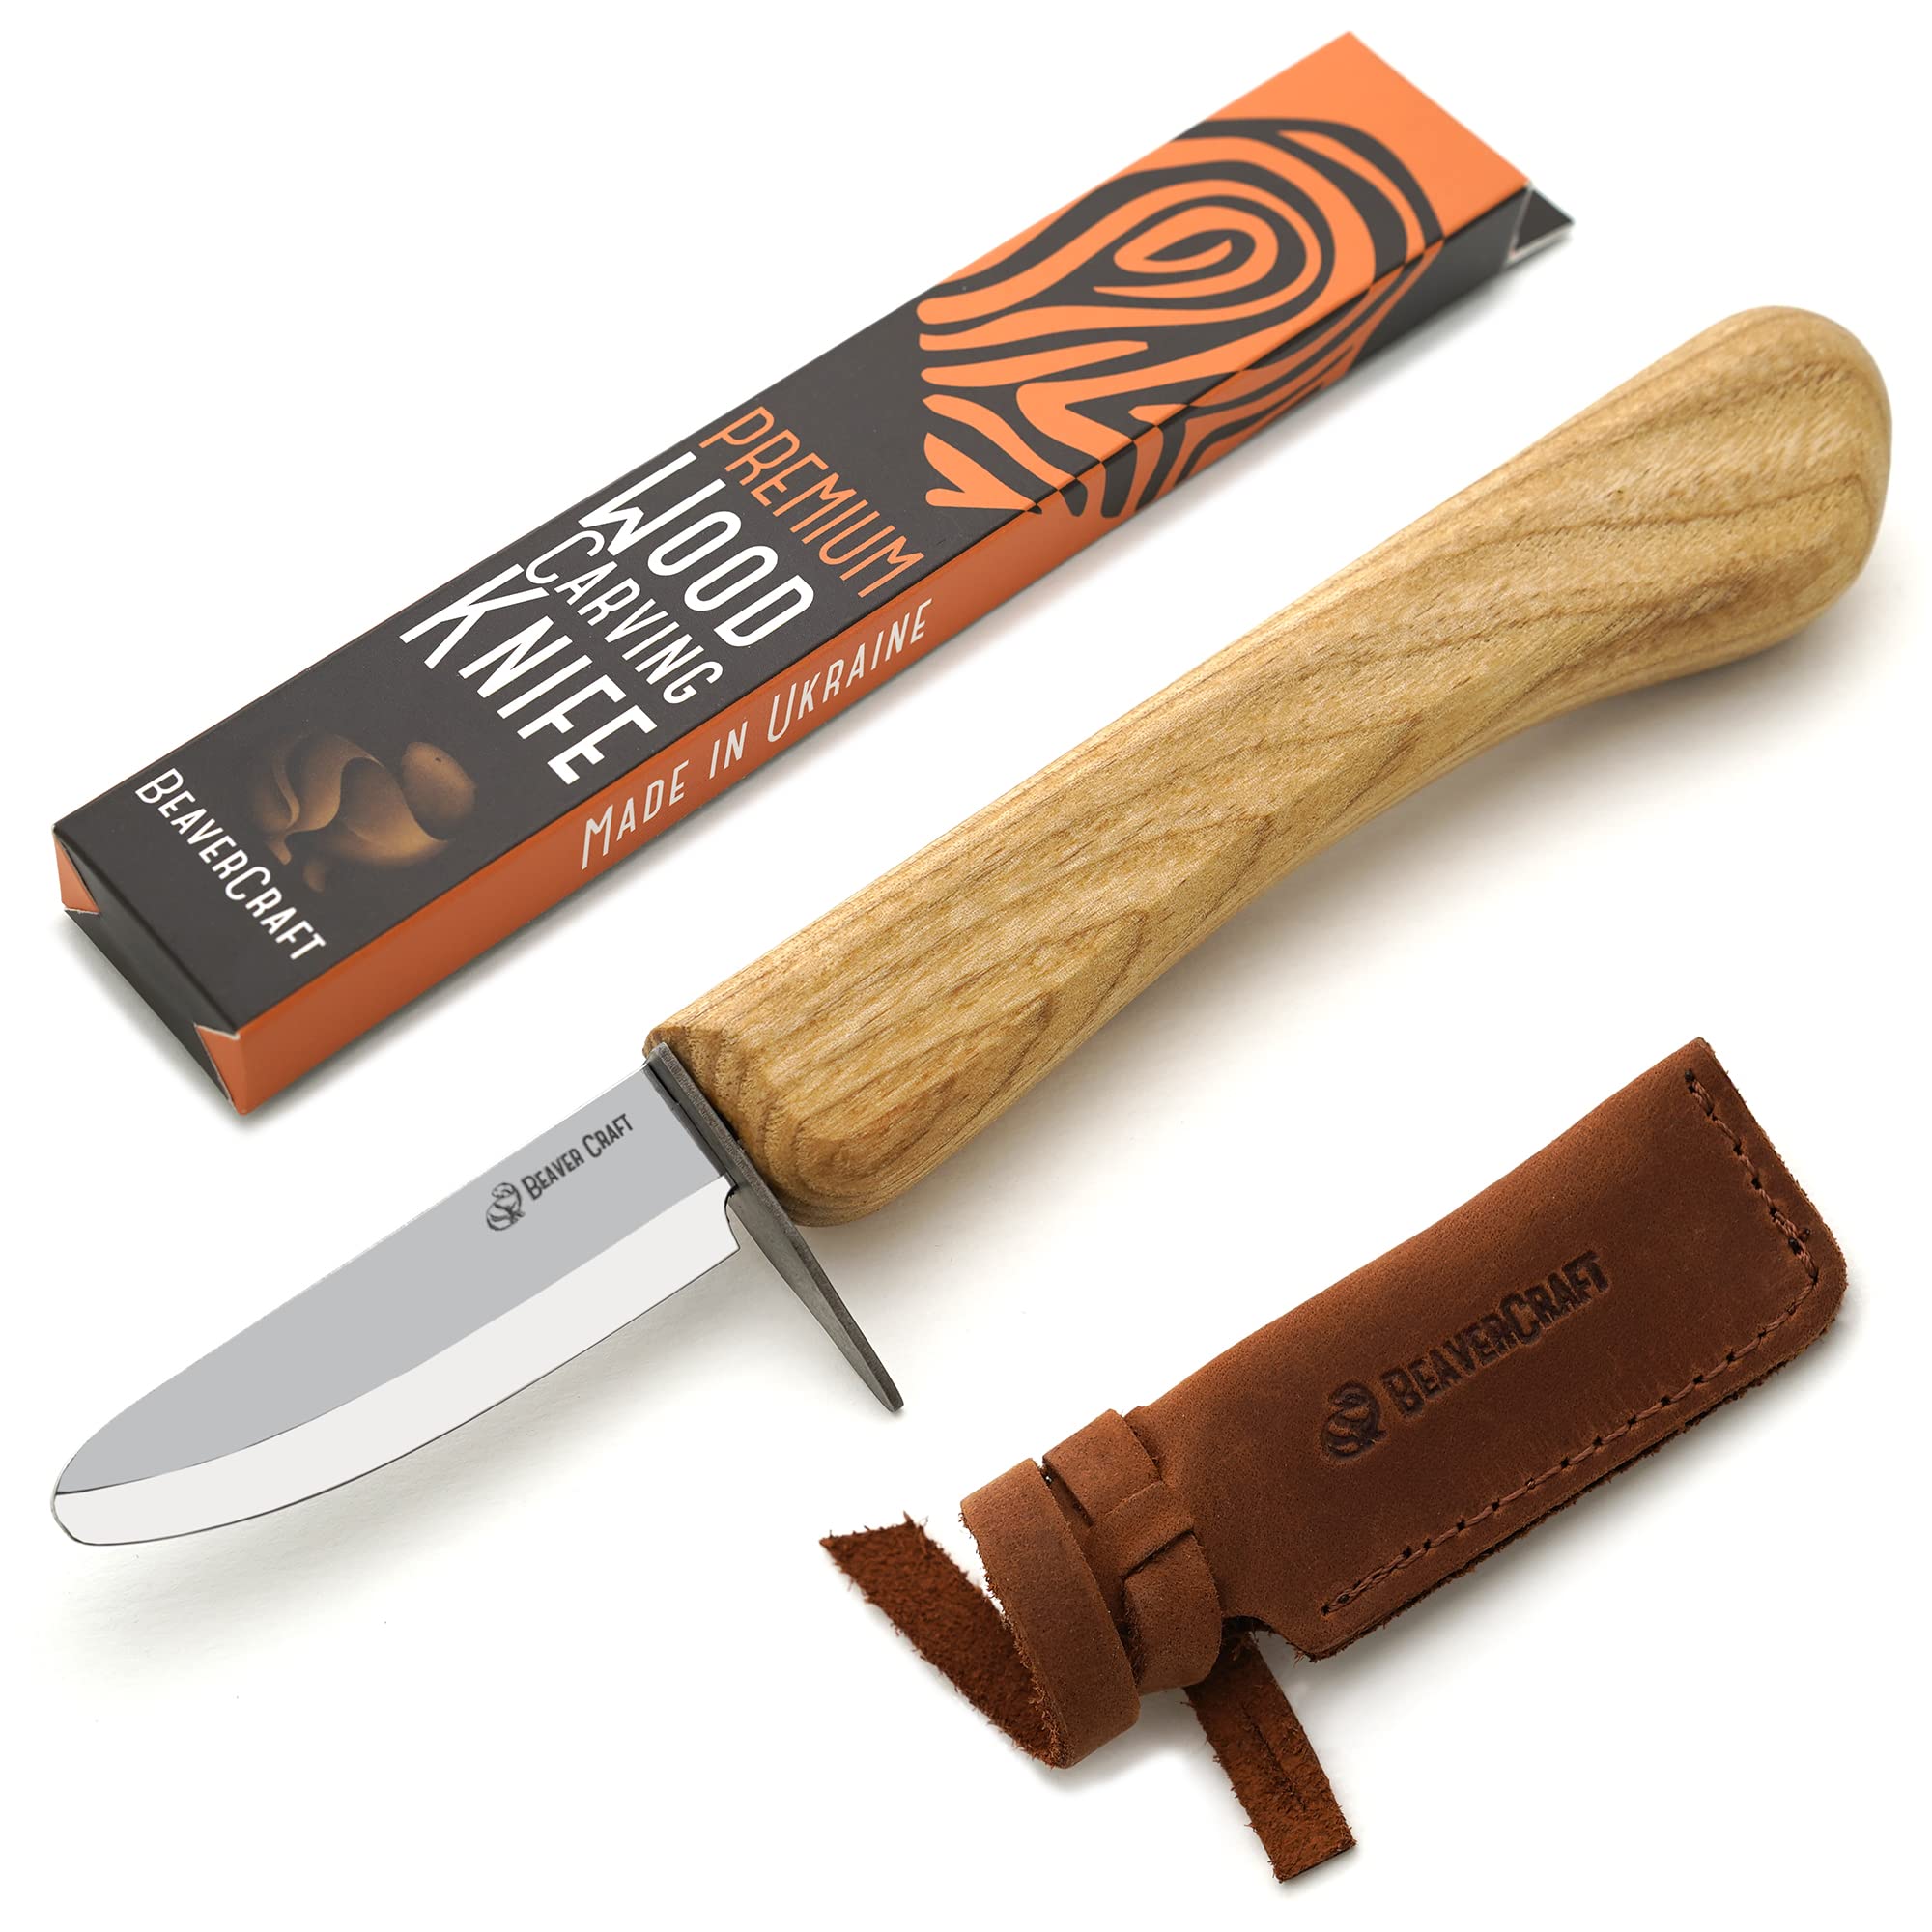 The Best Budget Whittling and Wood Carving Tools - Beavercraft Tools 